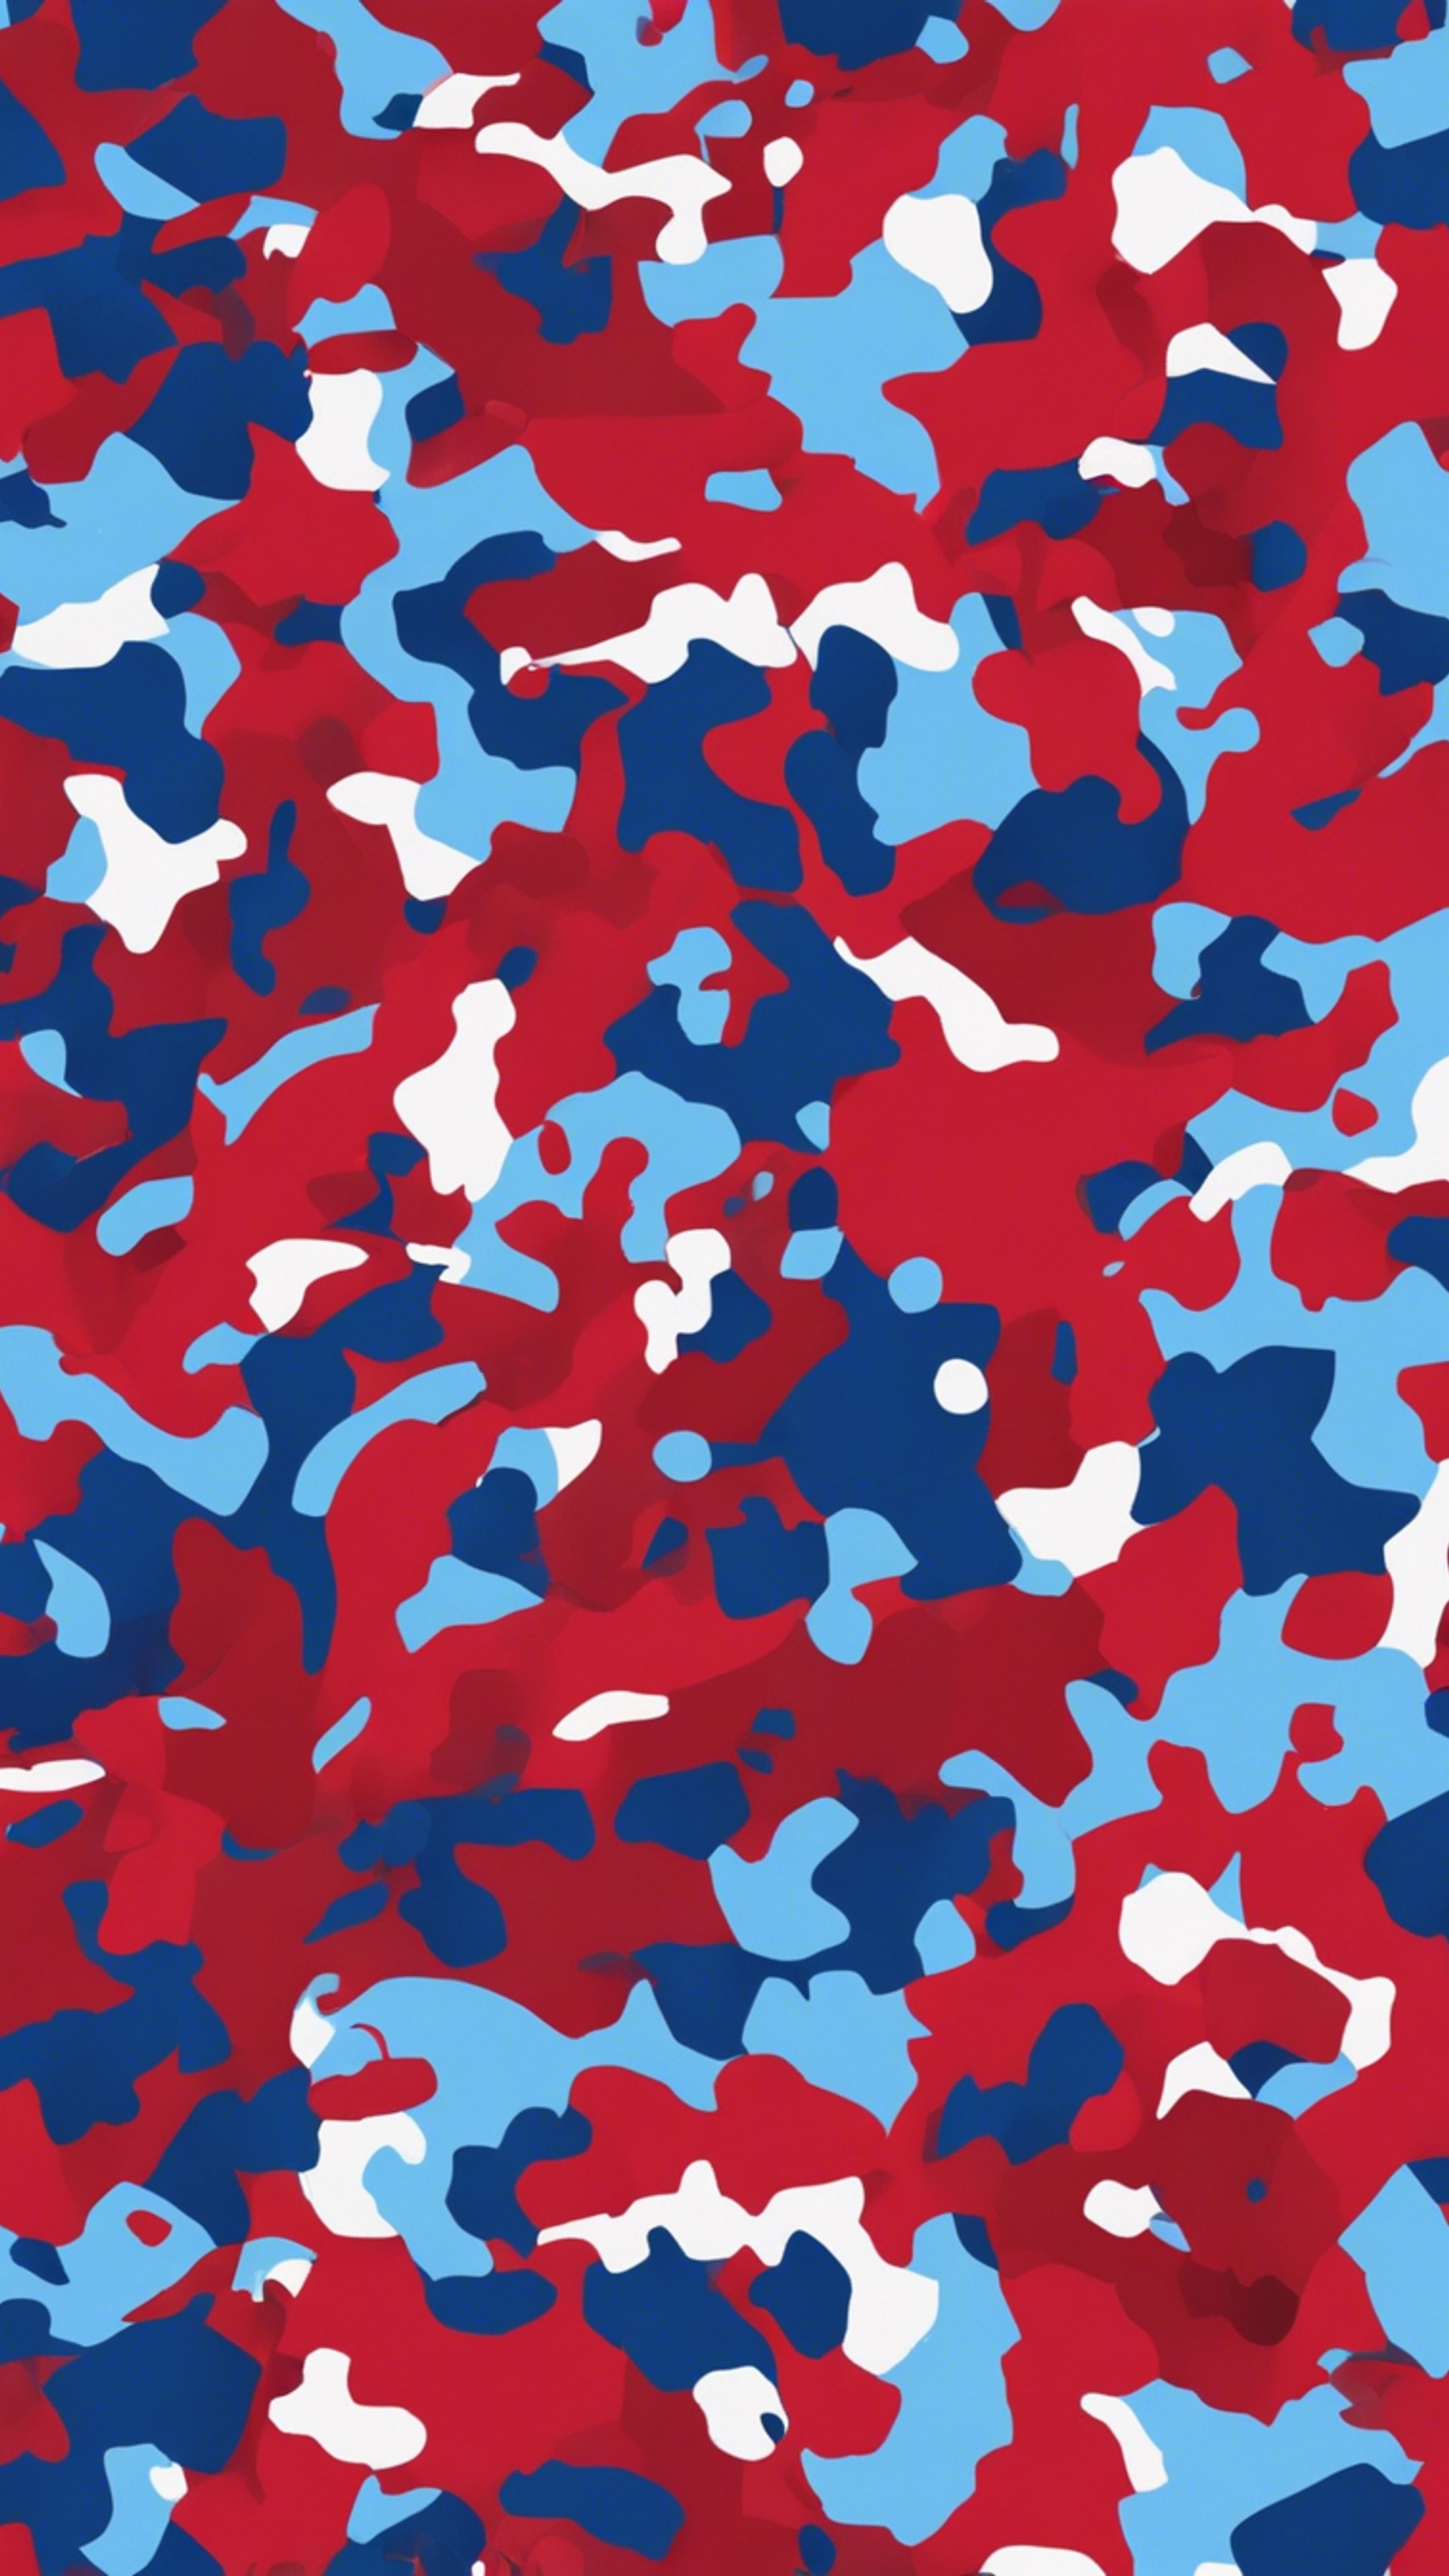 Camouflage pattern in shades of red and blue distributed randomly. Wallpaper[29e12ceb4fee465f920c]